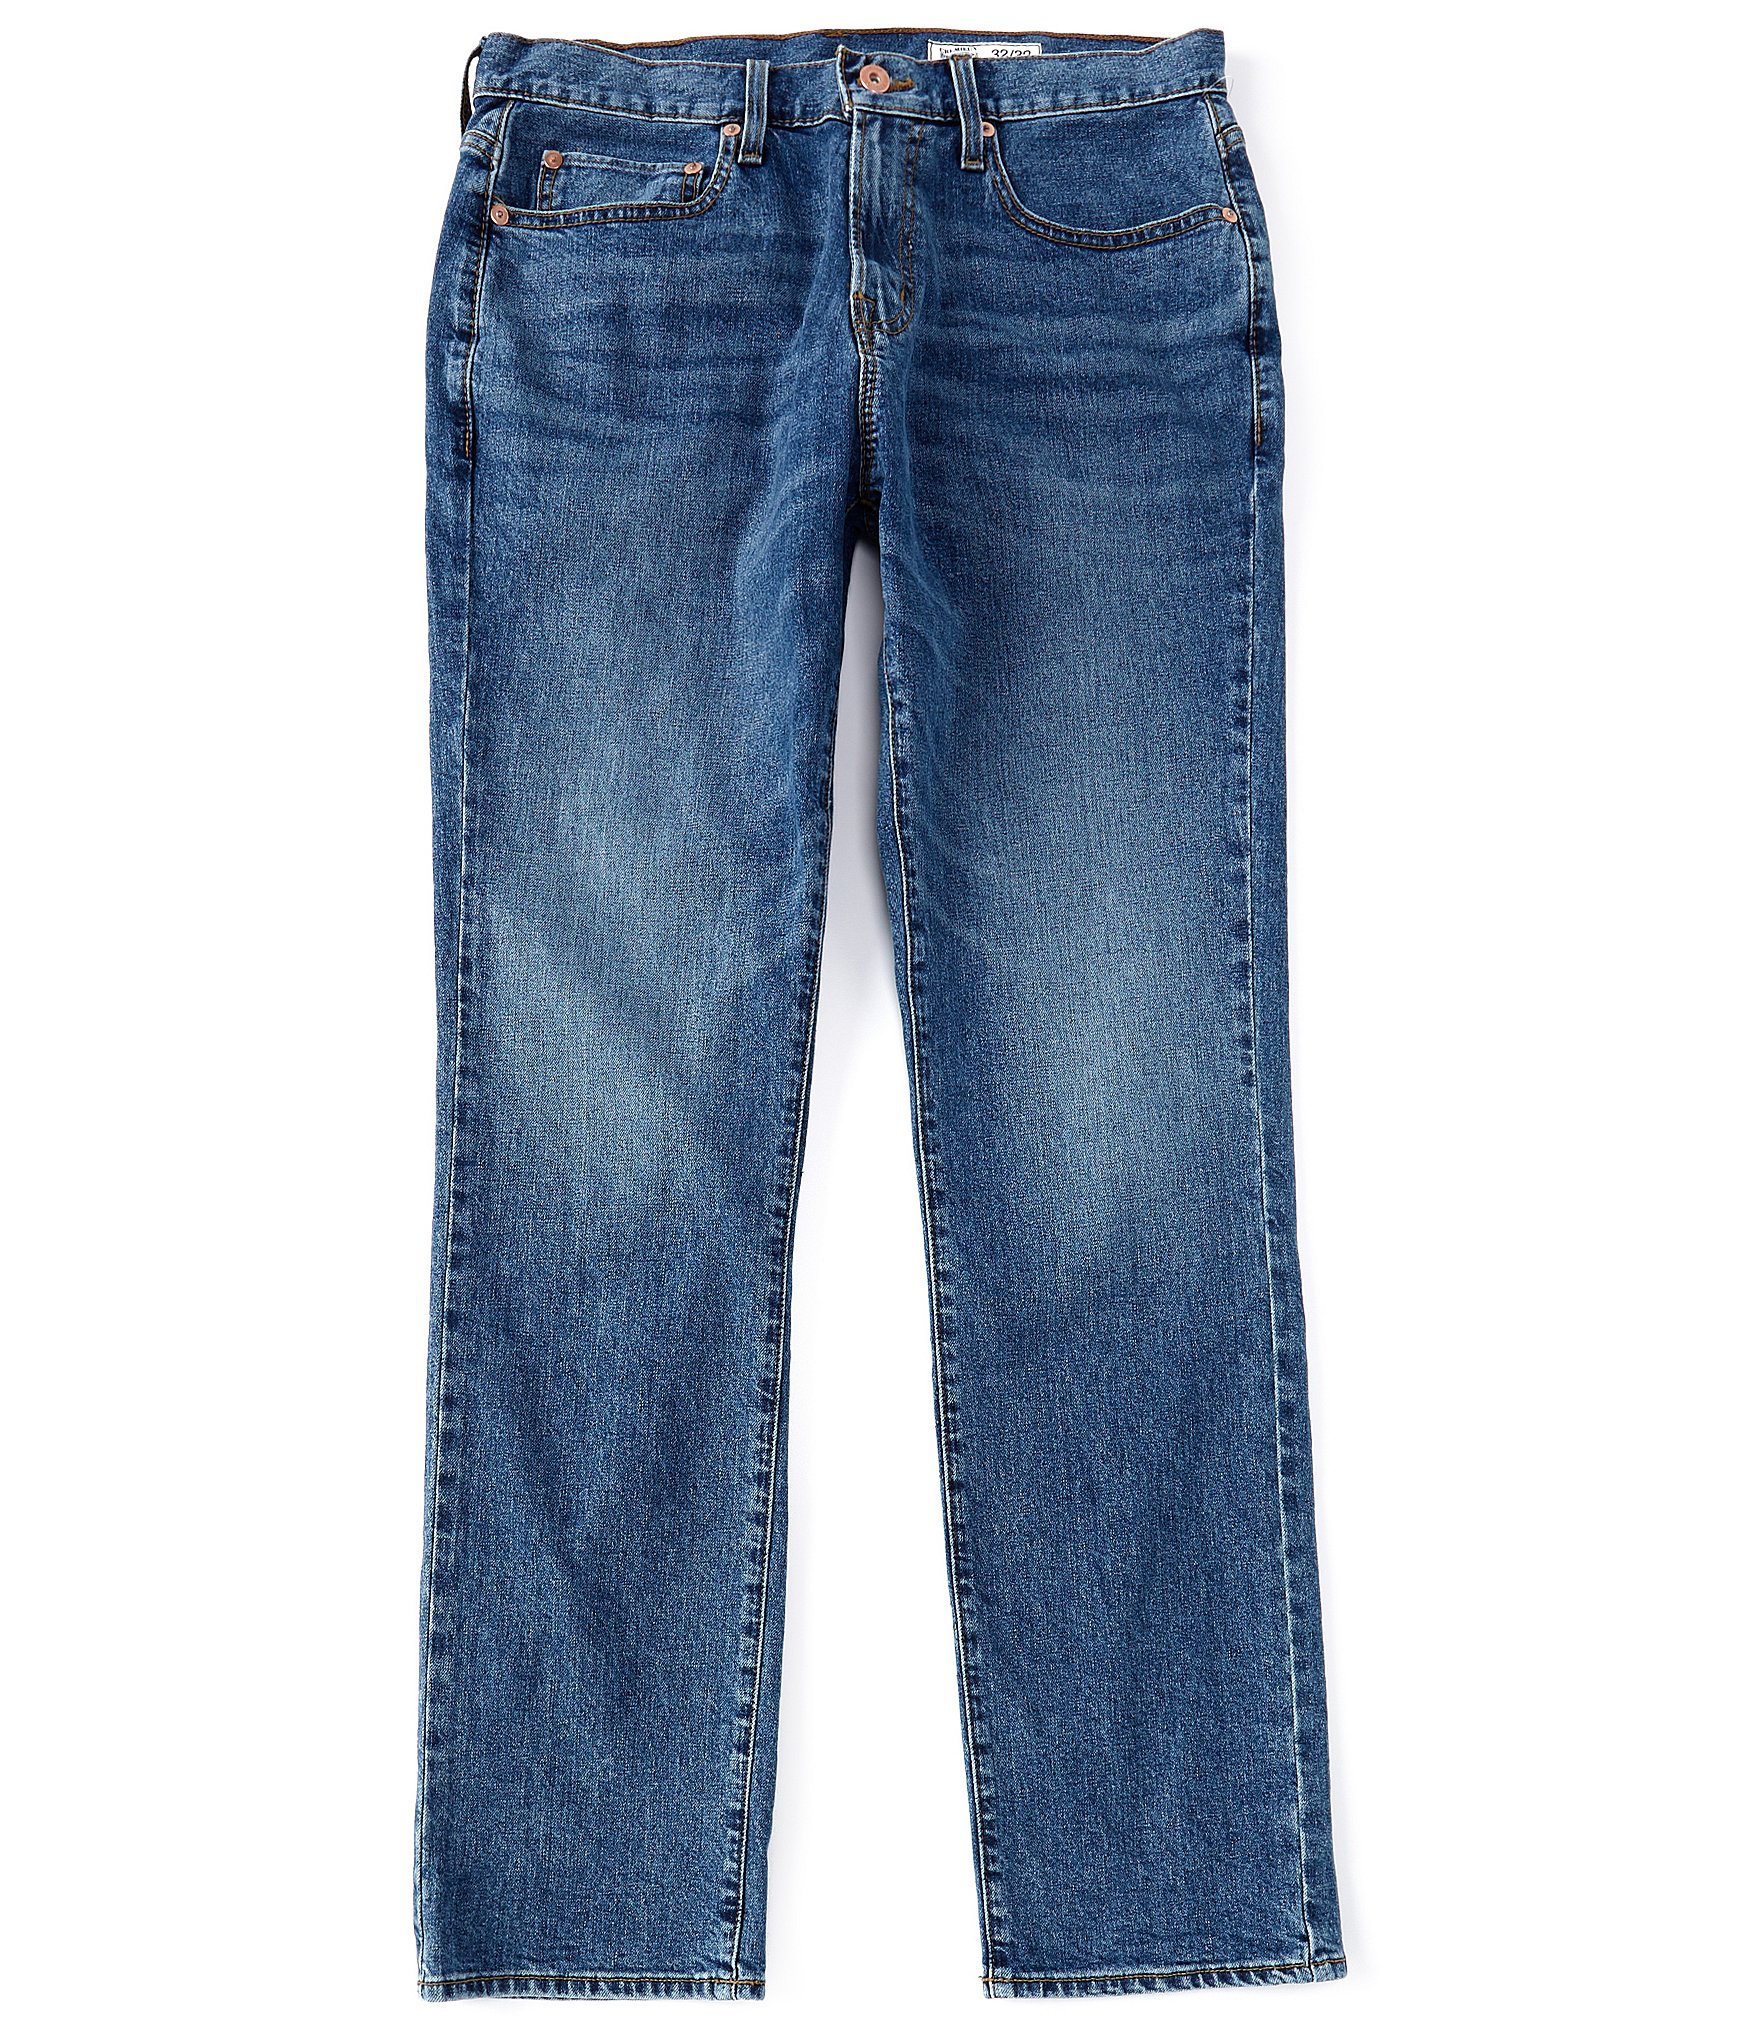 Cremieux Jeans Relaxed Straight-Fit Medium Stone Wash Stretch Denim ...